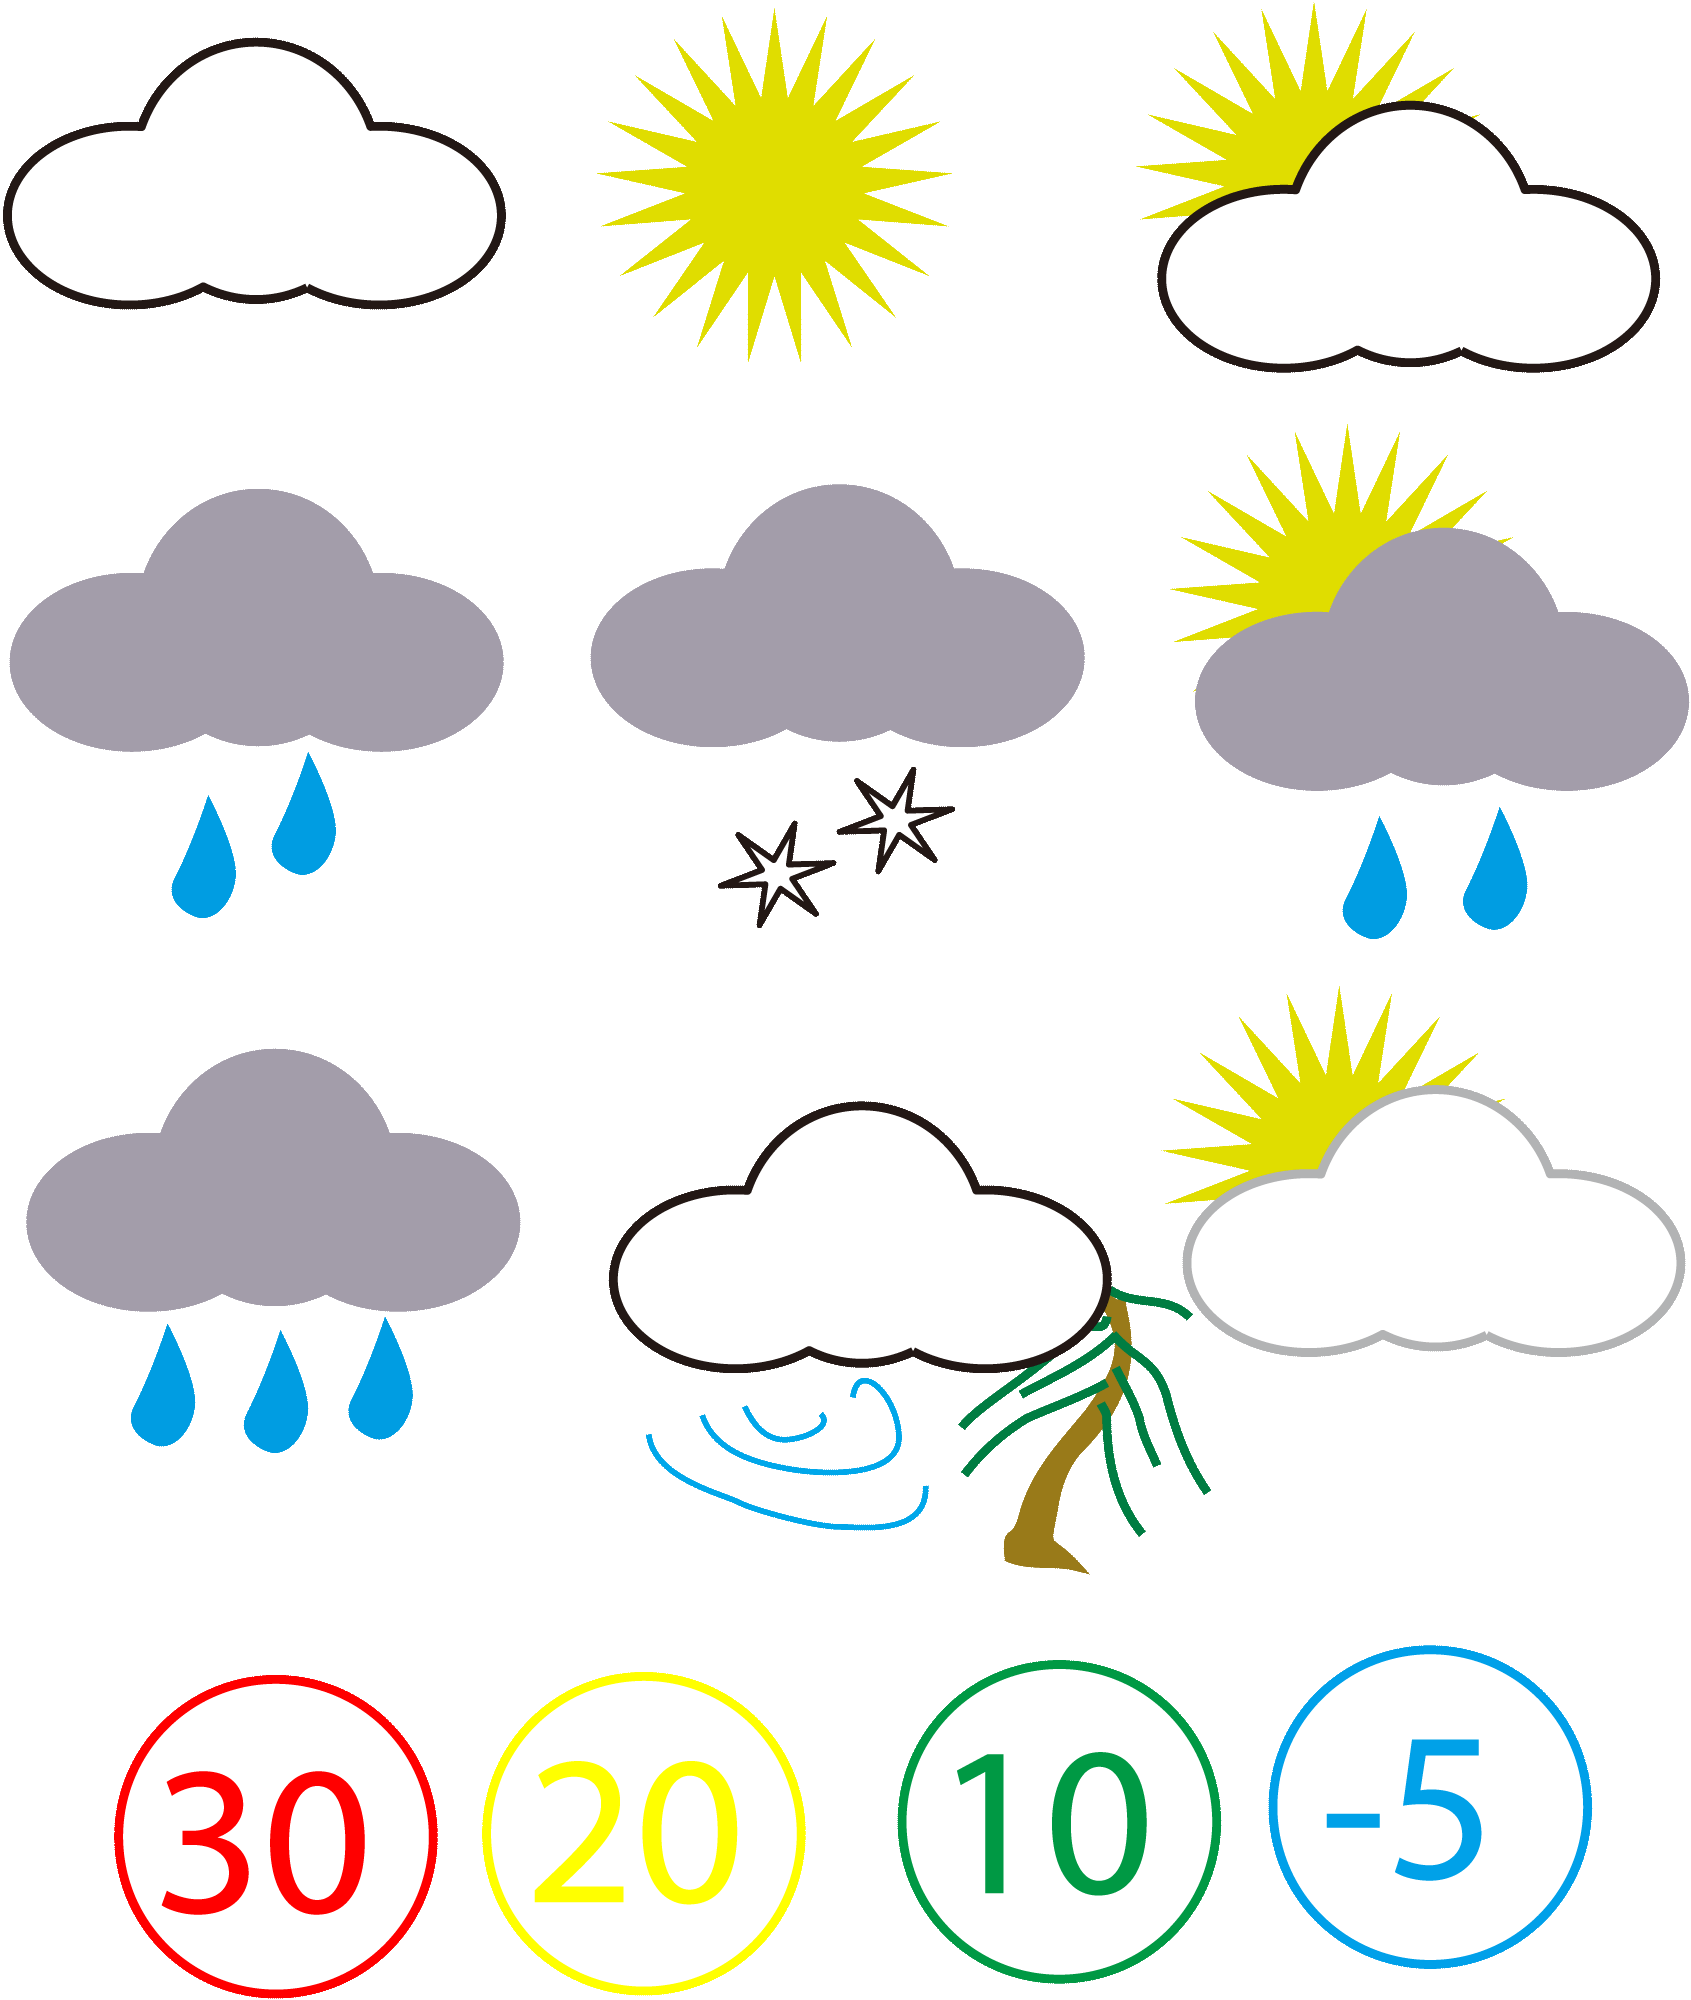 File:Weather-symbols.png - Wikimedia Commons